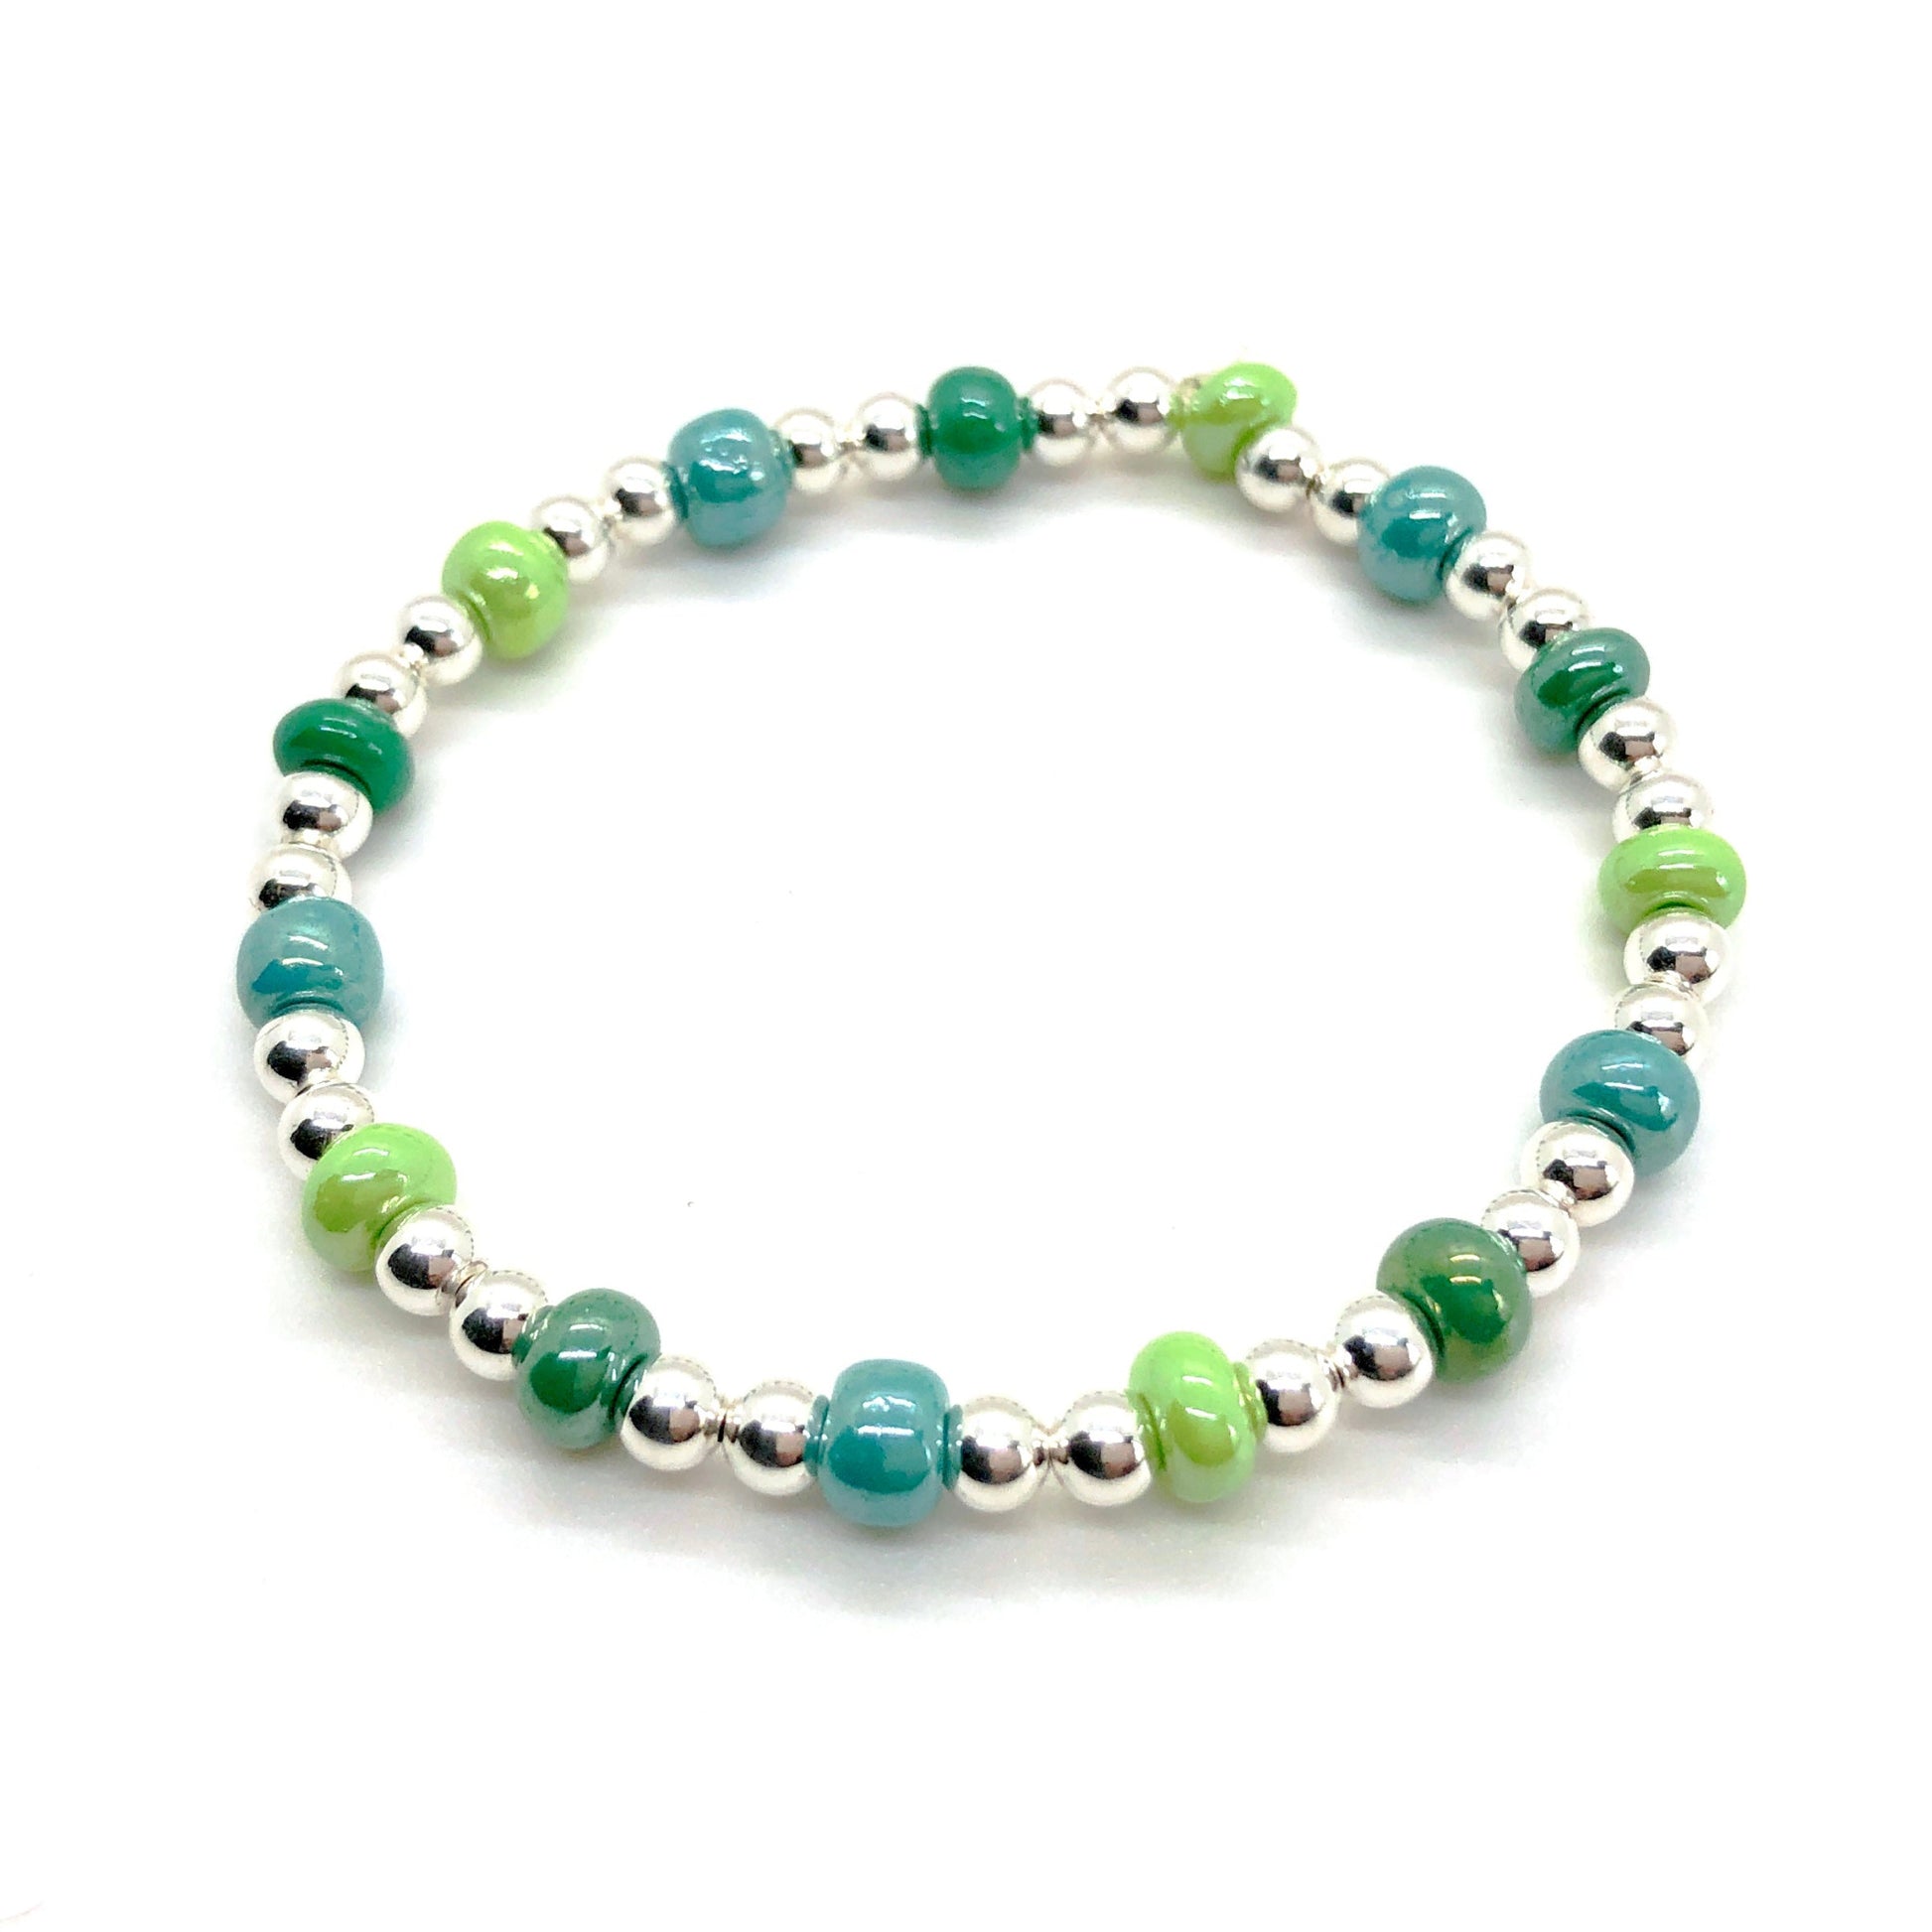 Silver stretch bracelet with alternating chunky colorful beads in shades of green.